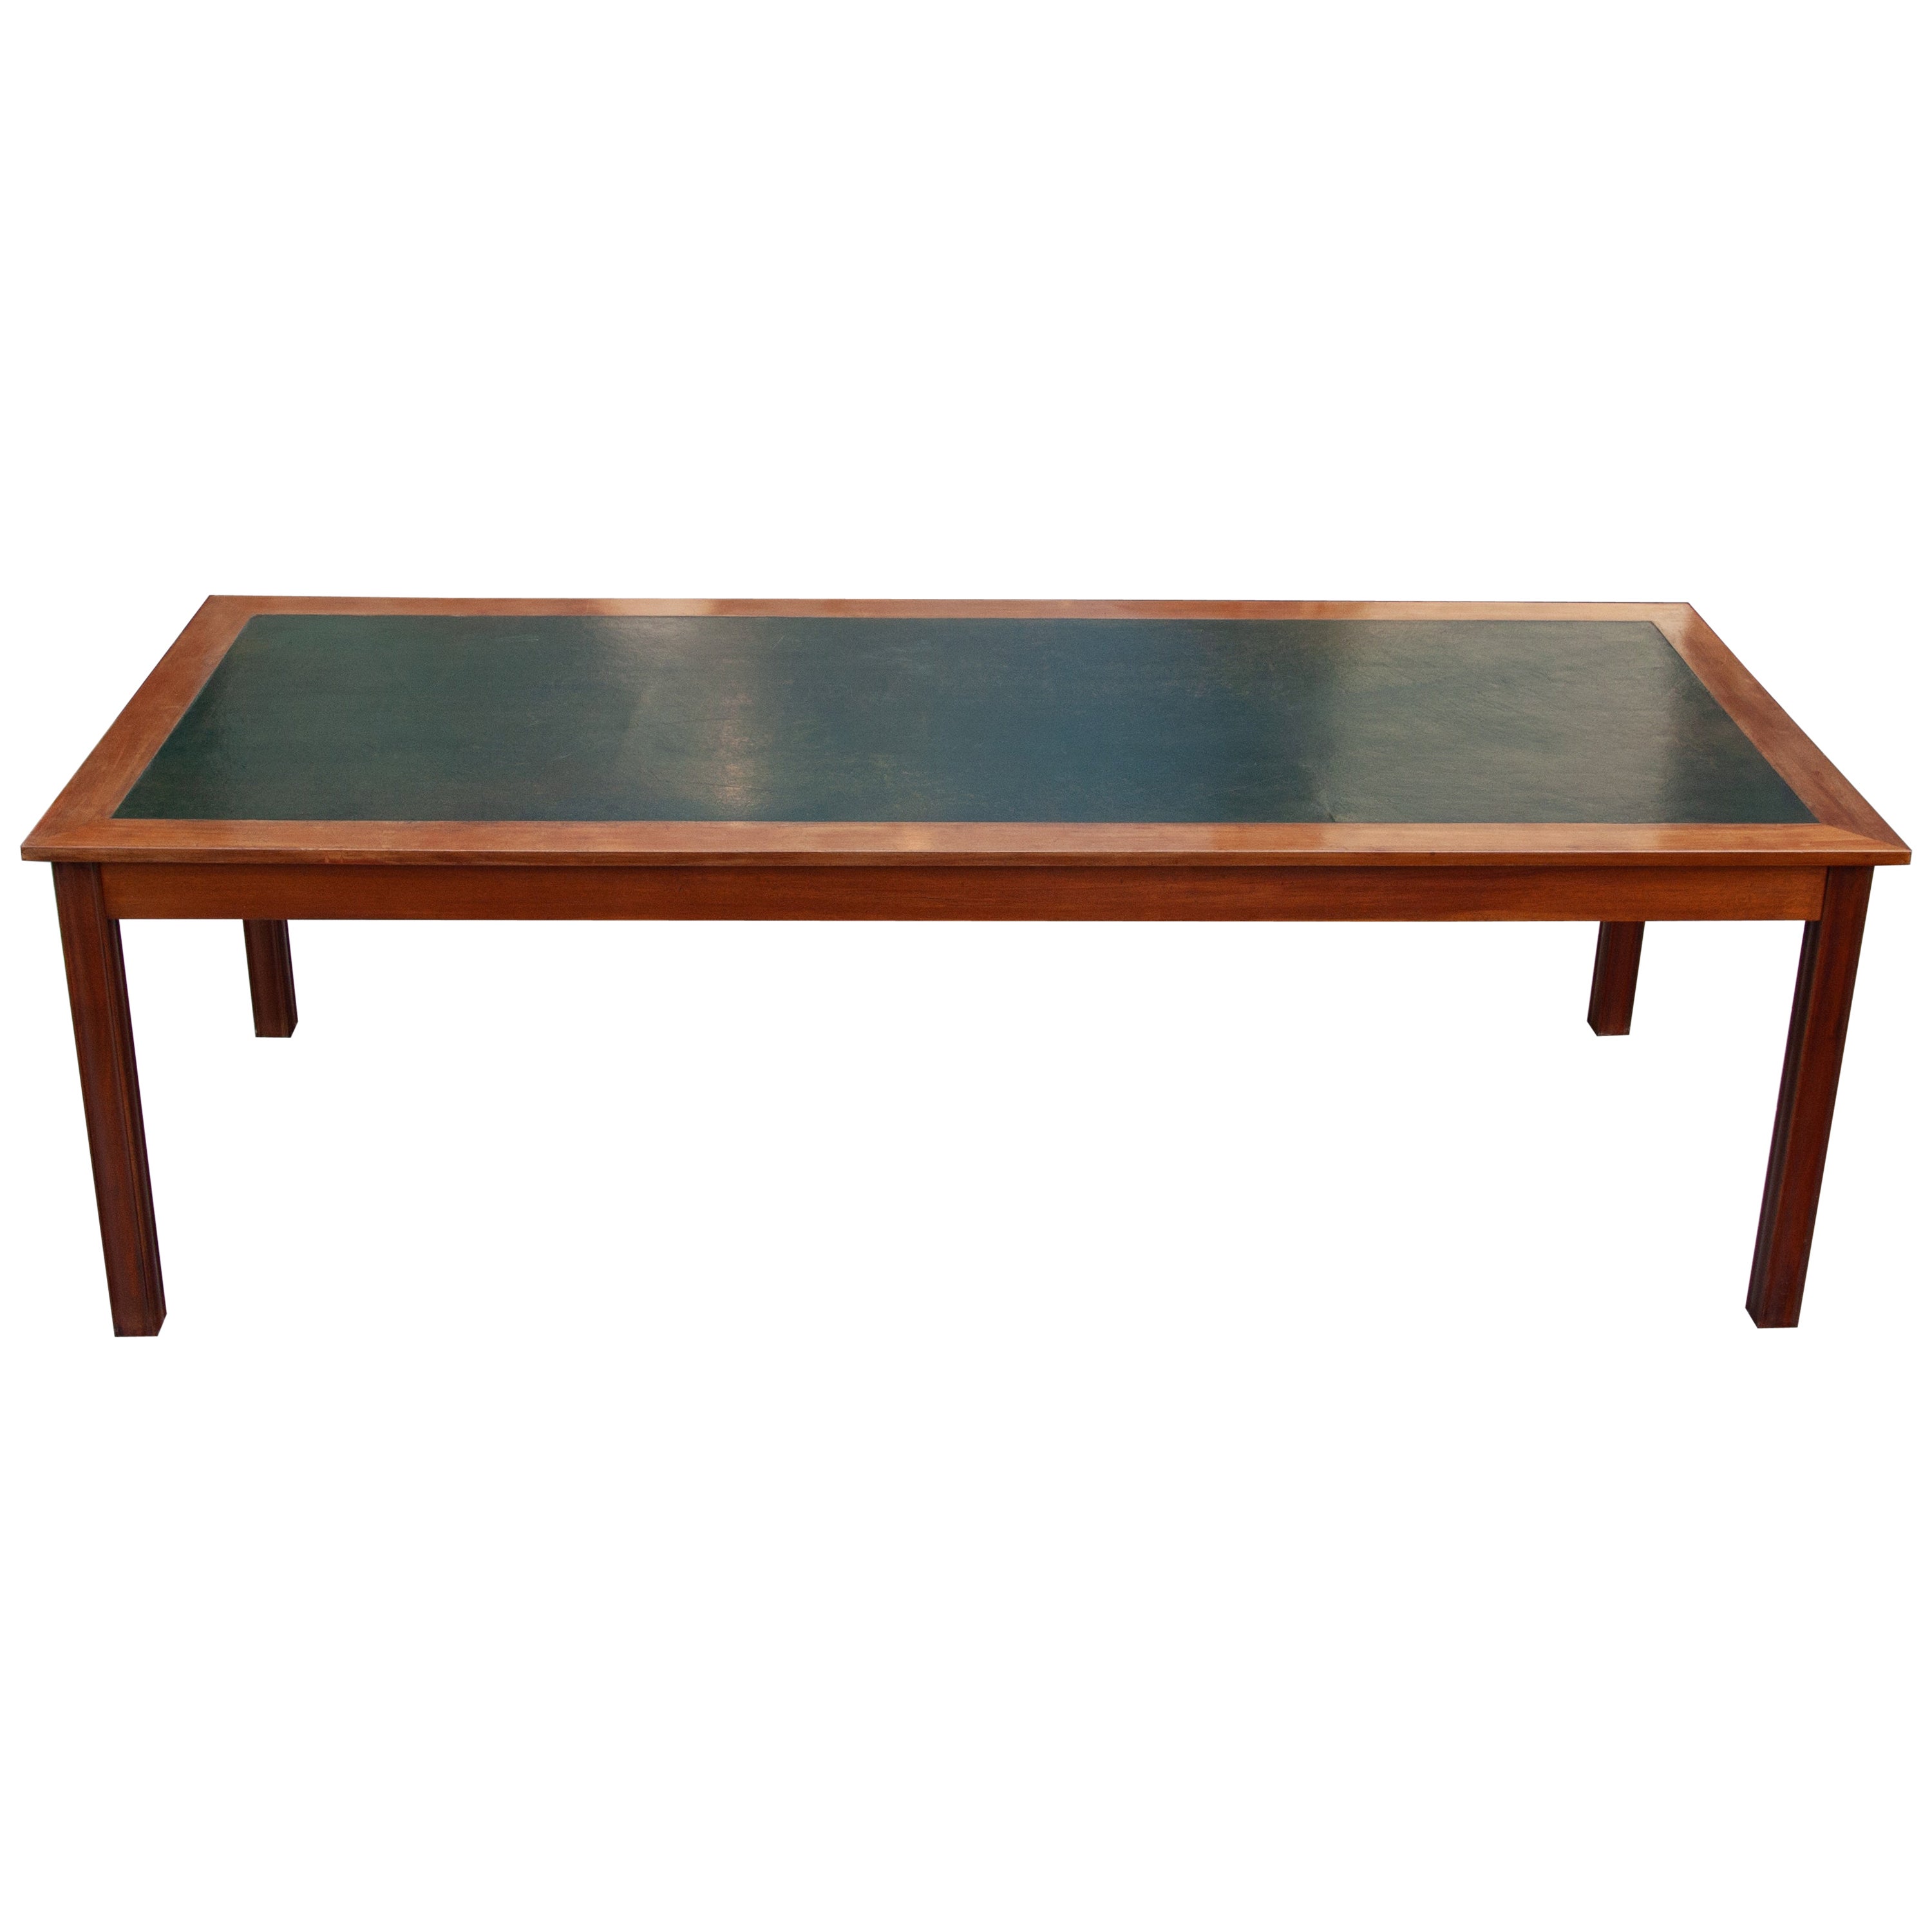 Large Mahogany Library or Dining Table, 1940s, Danish For Sale